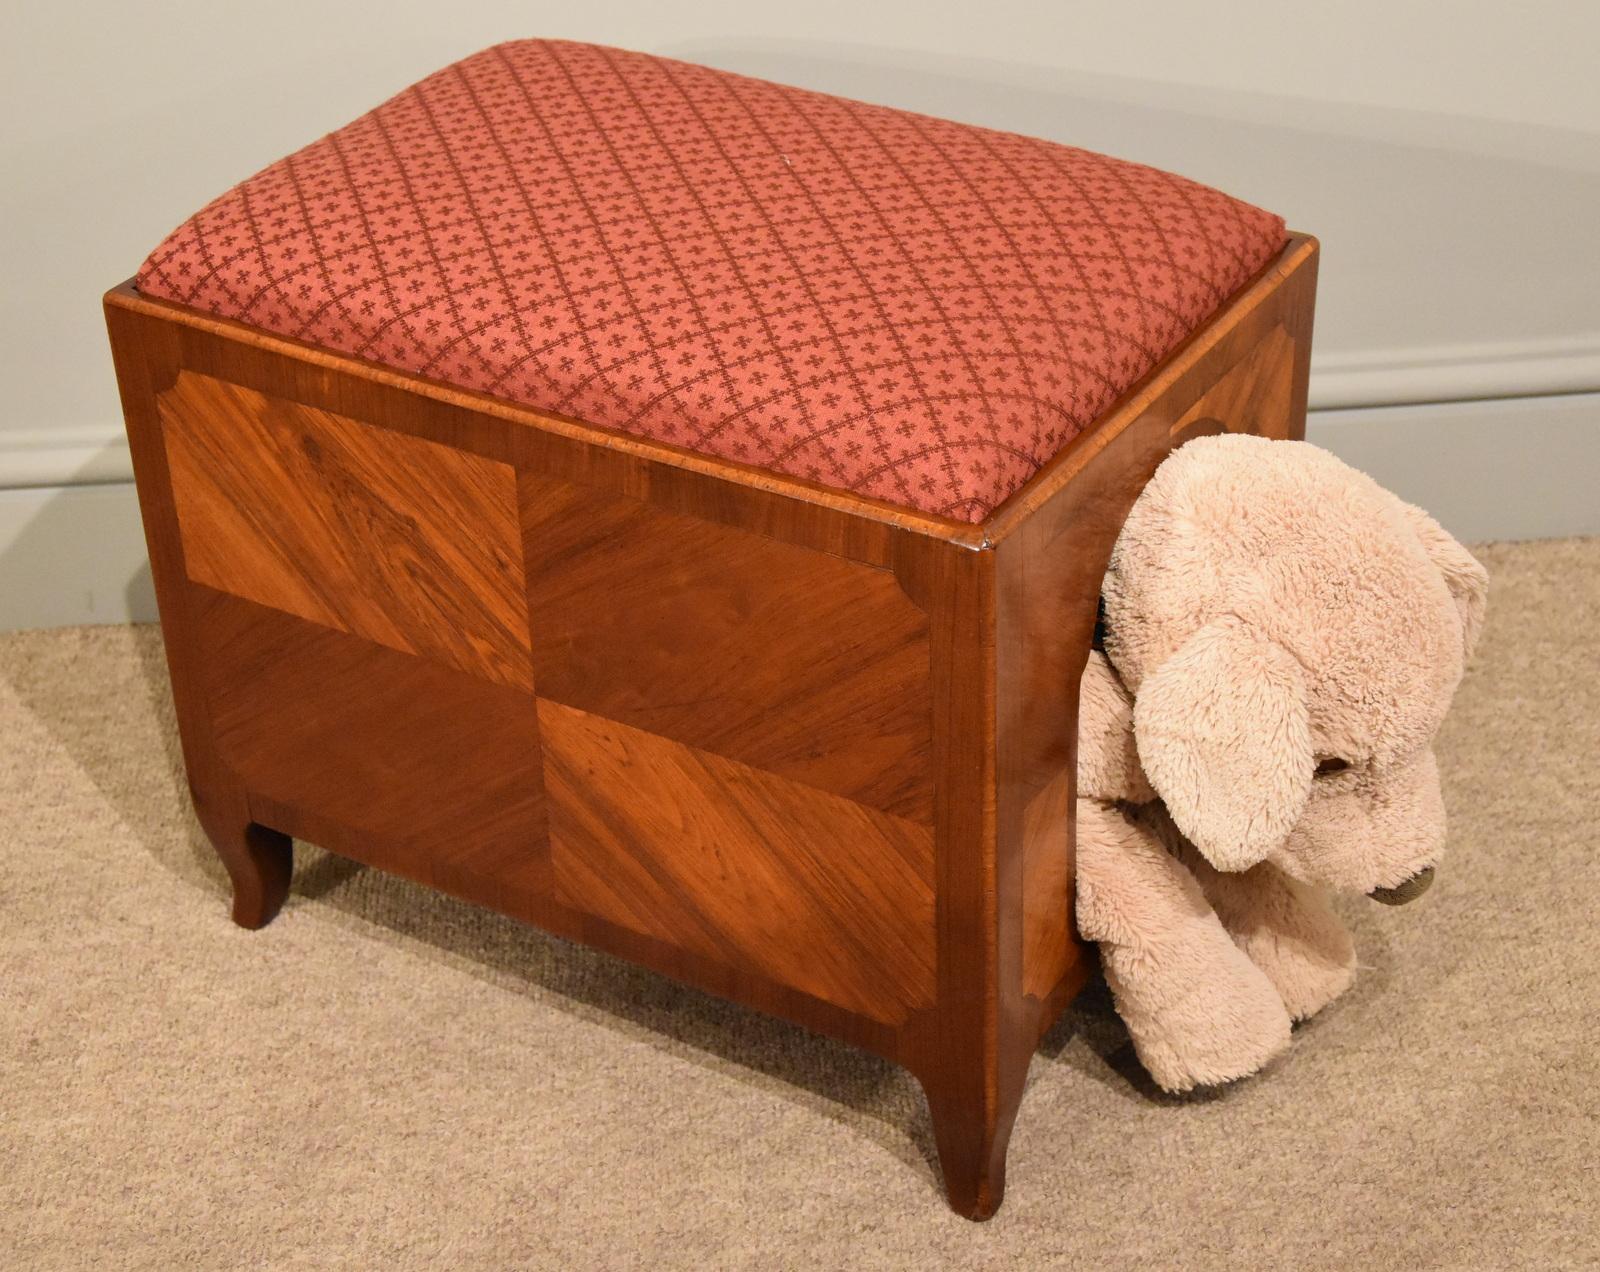 An unusual mid-19th century kingwood French dog kennel/stool.

Measures: Height 18